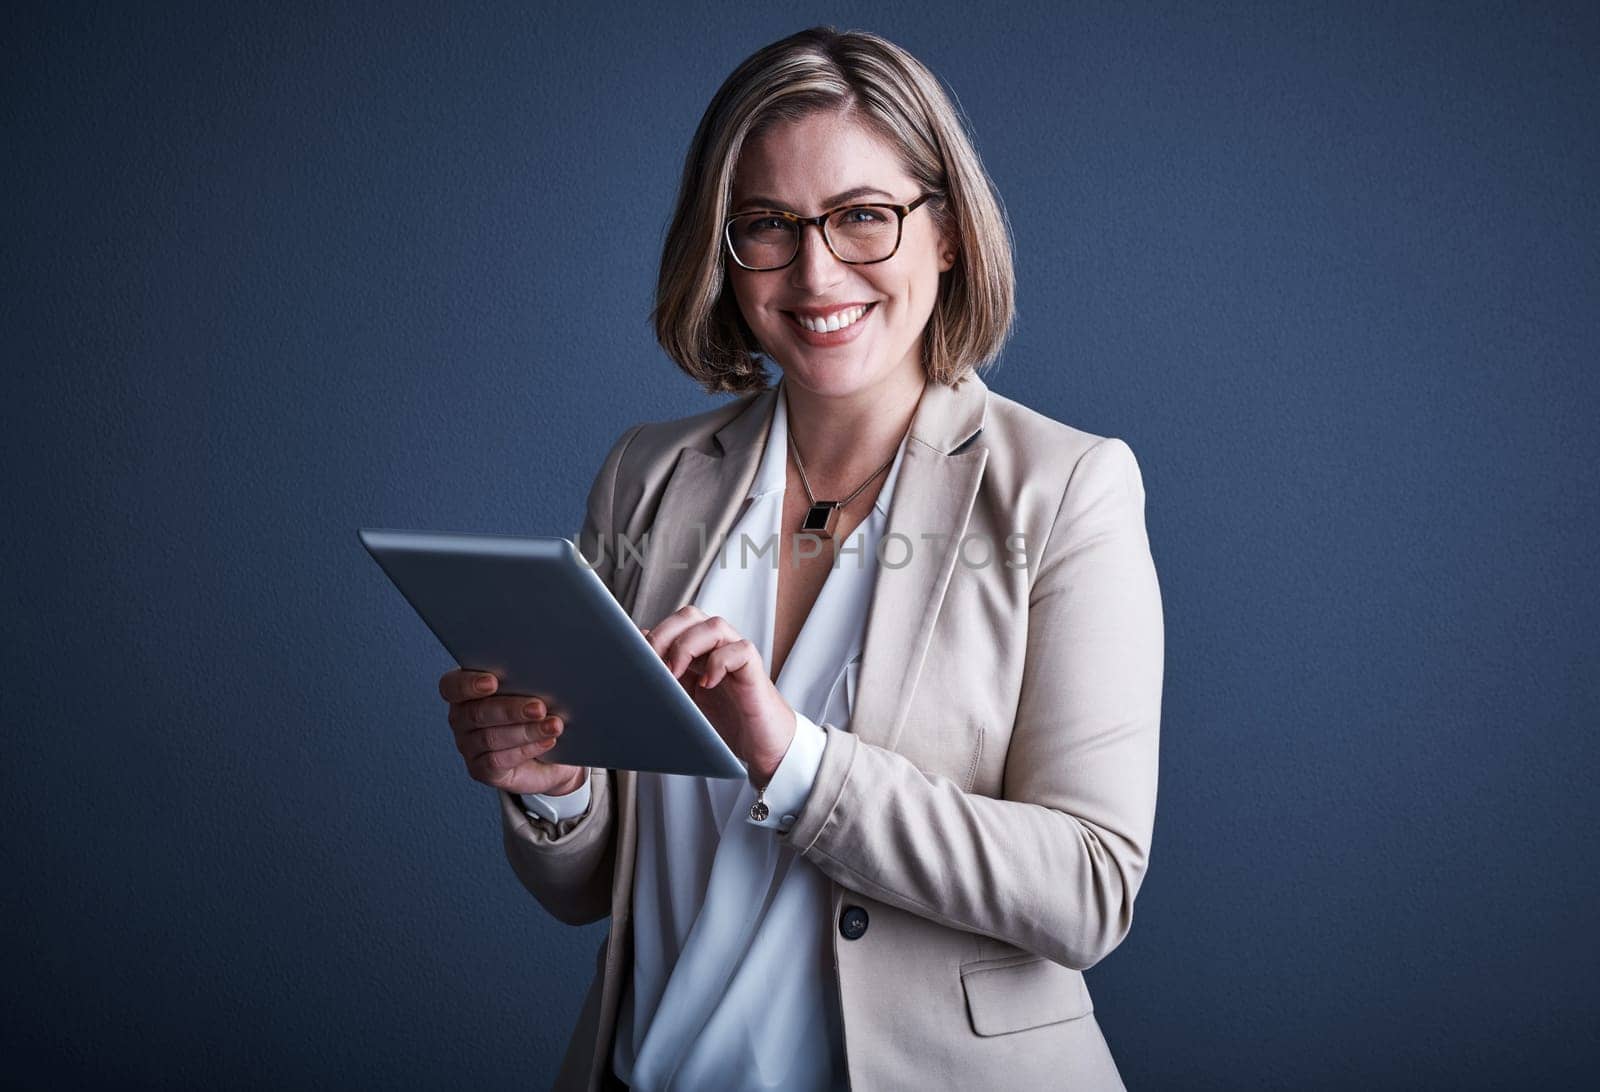 Its an invaluable resource. Studio portrait of an attractive young corporate businesswoman using a tablet against a dark background. by YuriArcurs